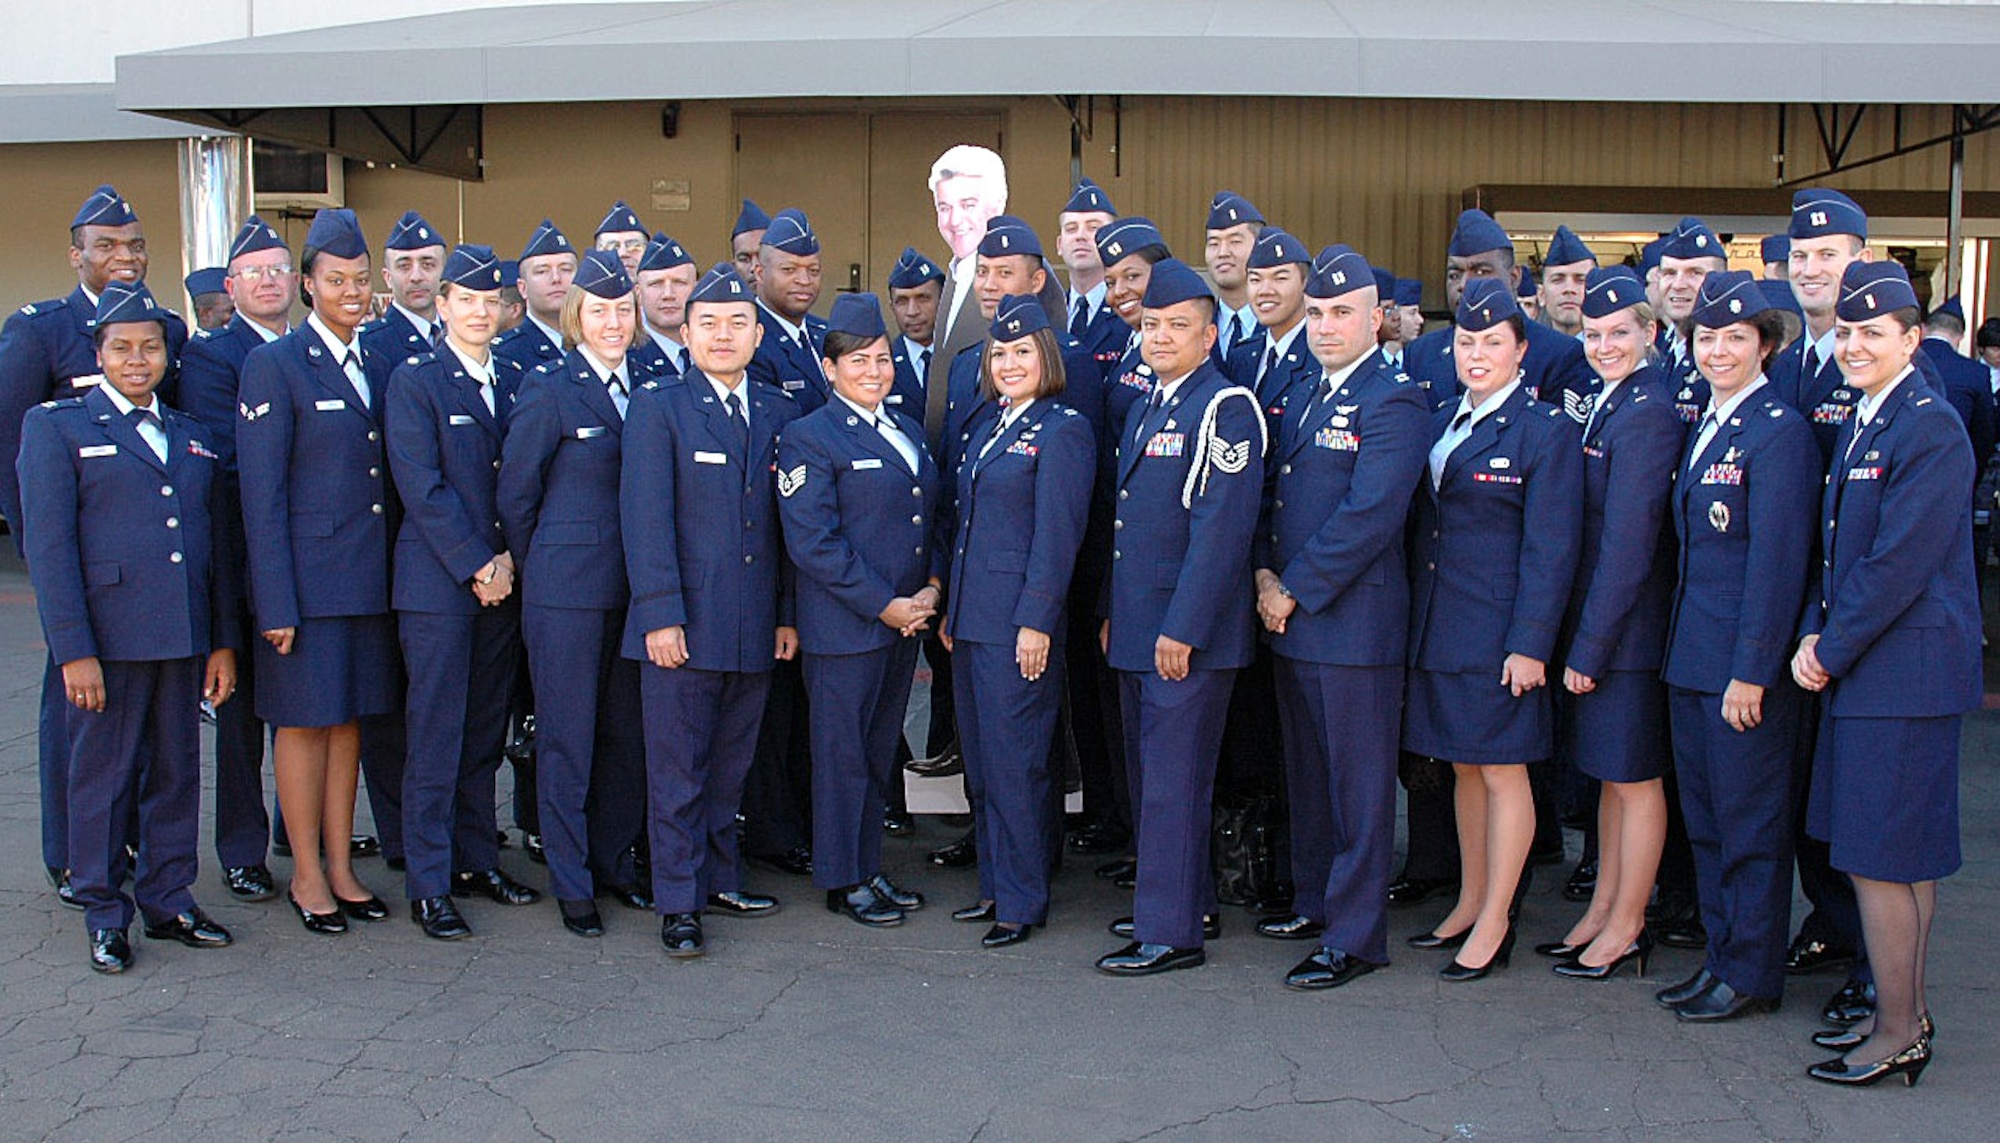 Los Angeles Air Force Base personnel take a group photo outside NBC Studios, Burbank, Calif., with Jay Leno’s cardboard silhouette, Nov. 26. The participants came from various military bases around Southern California to be a part of the all-military audience for the Jay Leno Show’s military tribute on Thanksgiving Day. (Photo by 2nd Lt. Mara Title)